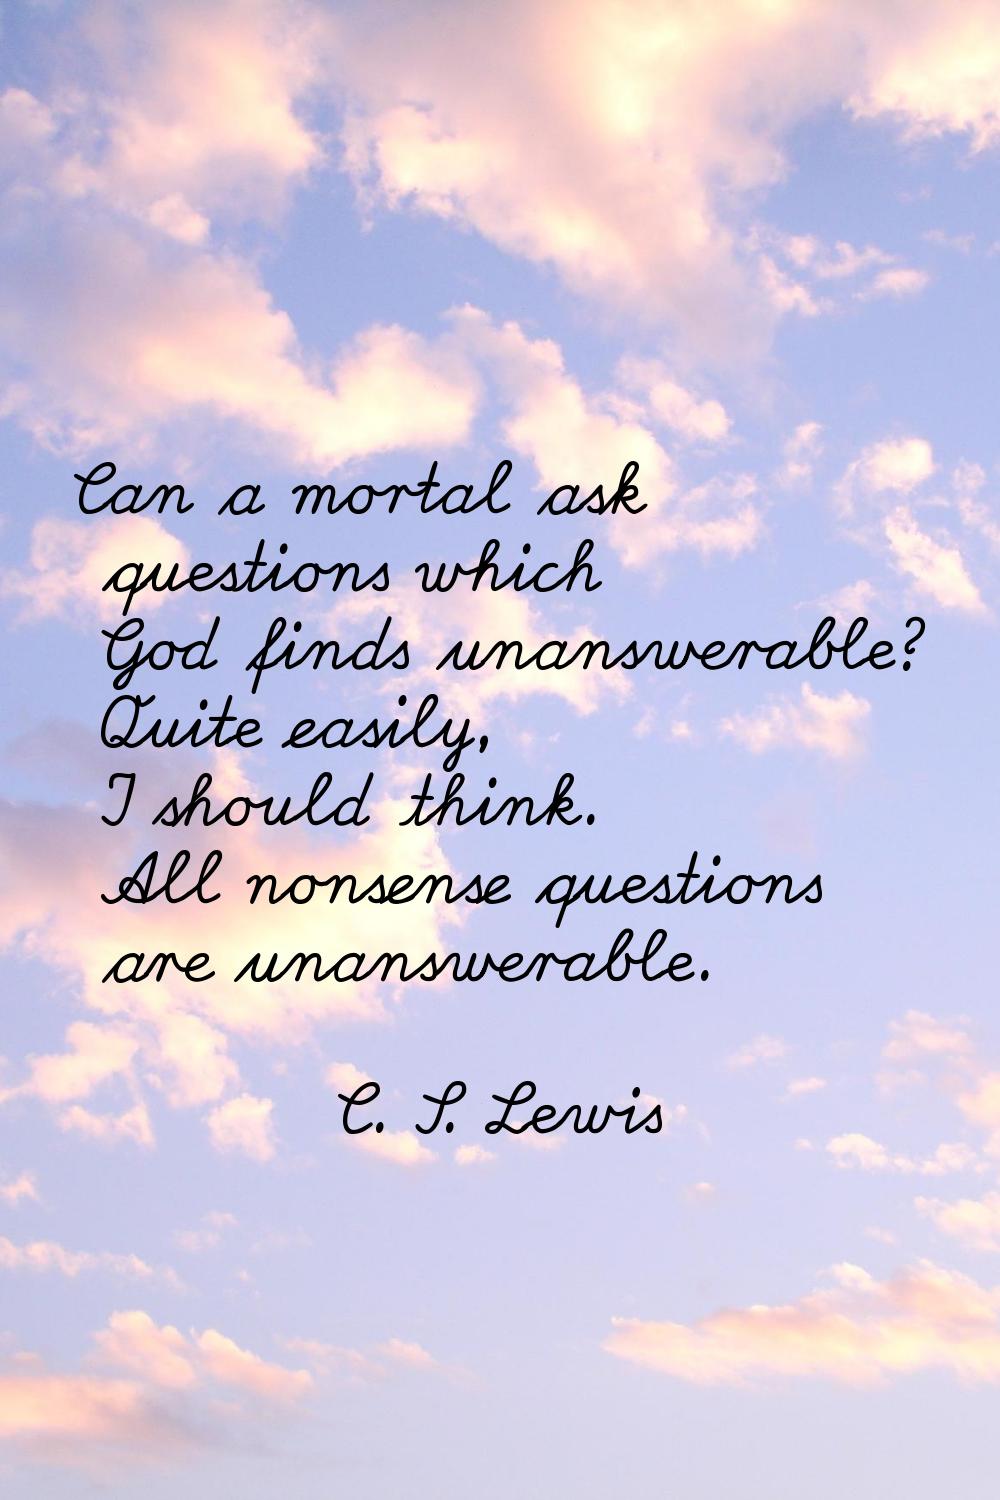 Can a mortal ask questions which God finds unanswerable? Quite easily, I should think. All nonsense